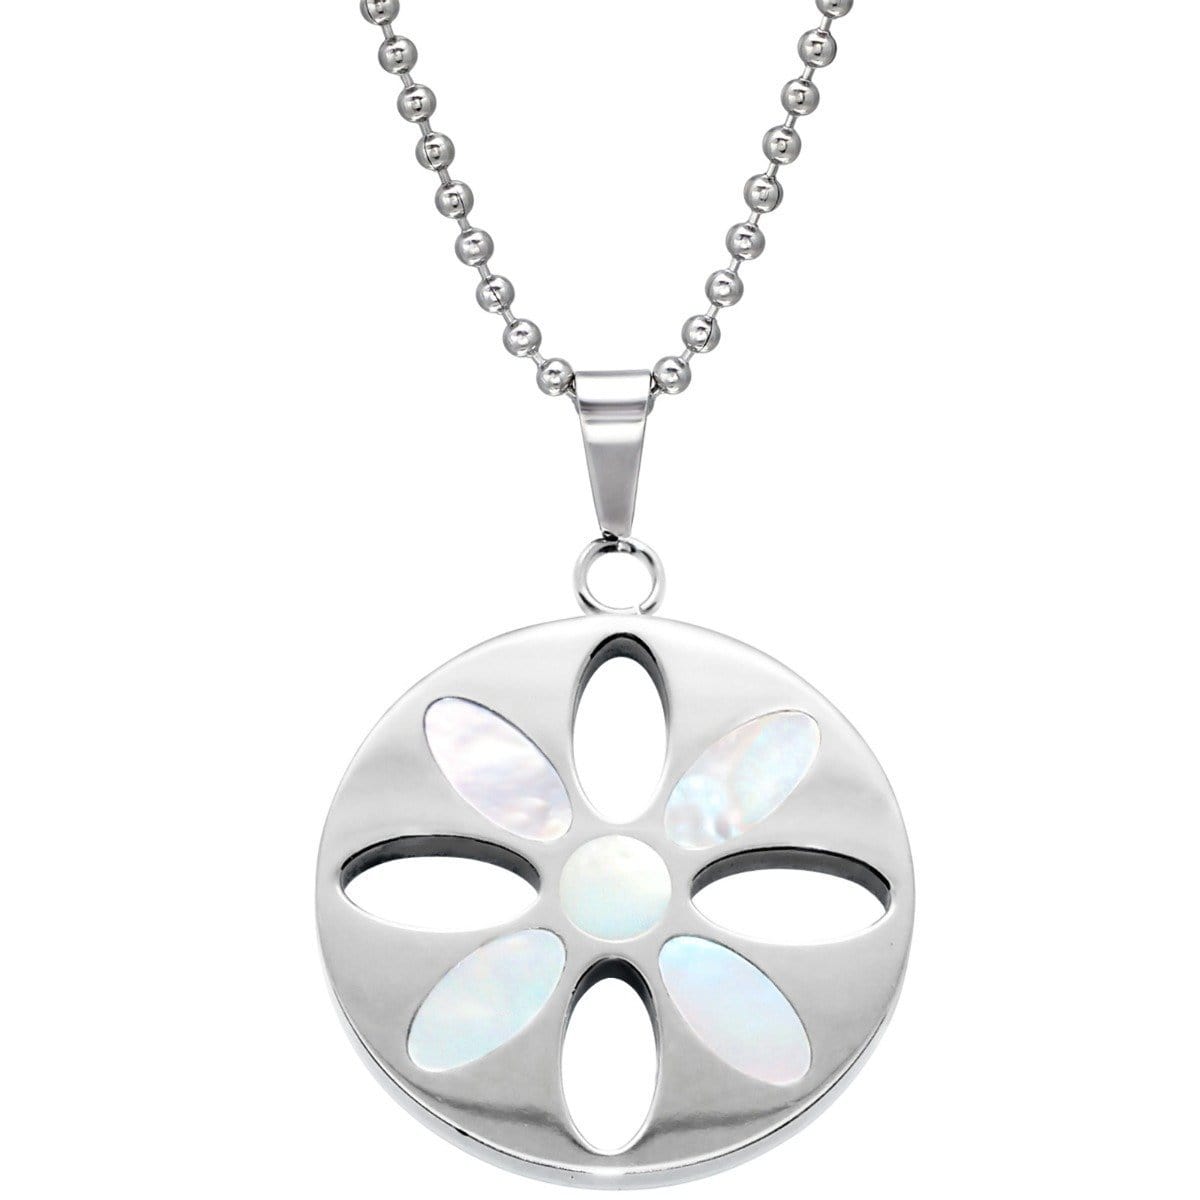 Stainless Steel Flower Necklace with Shell